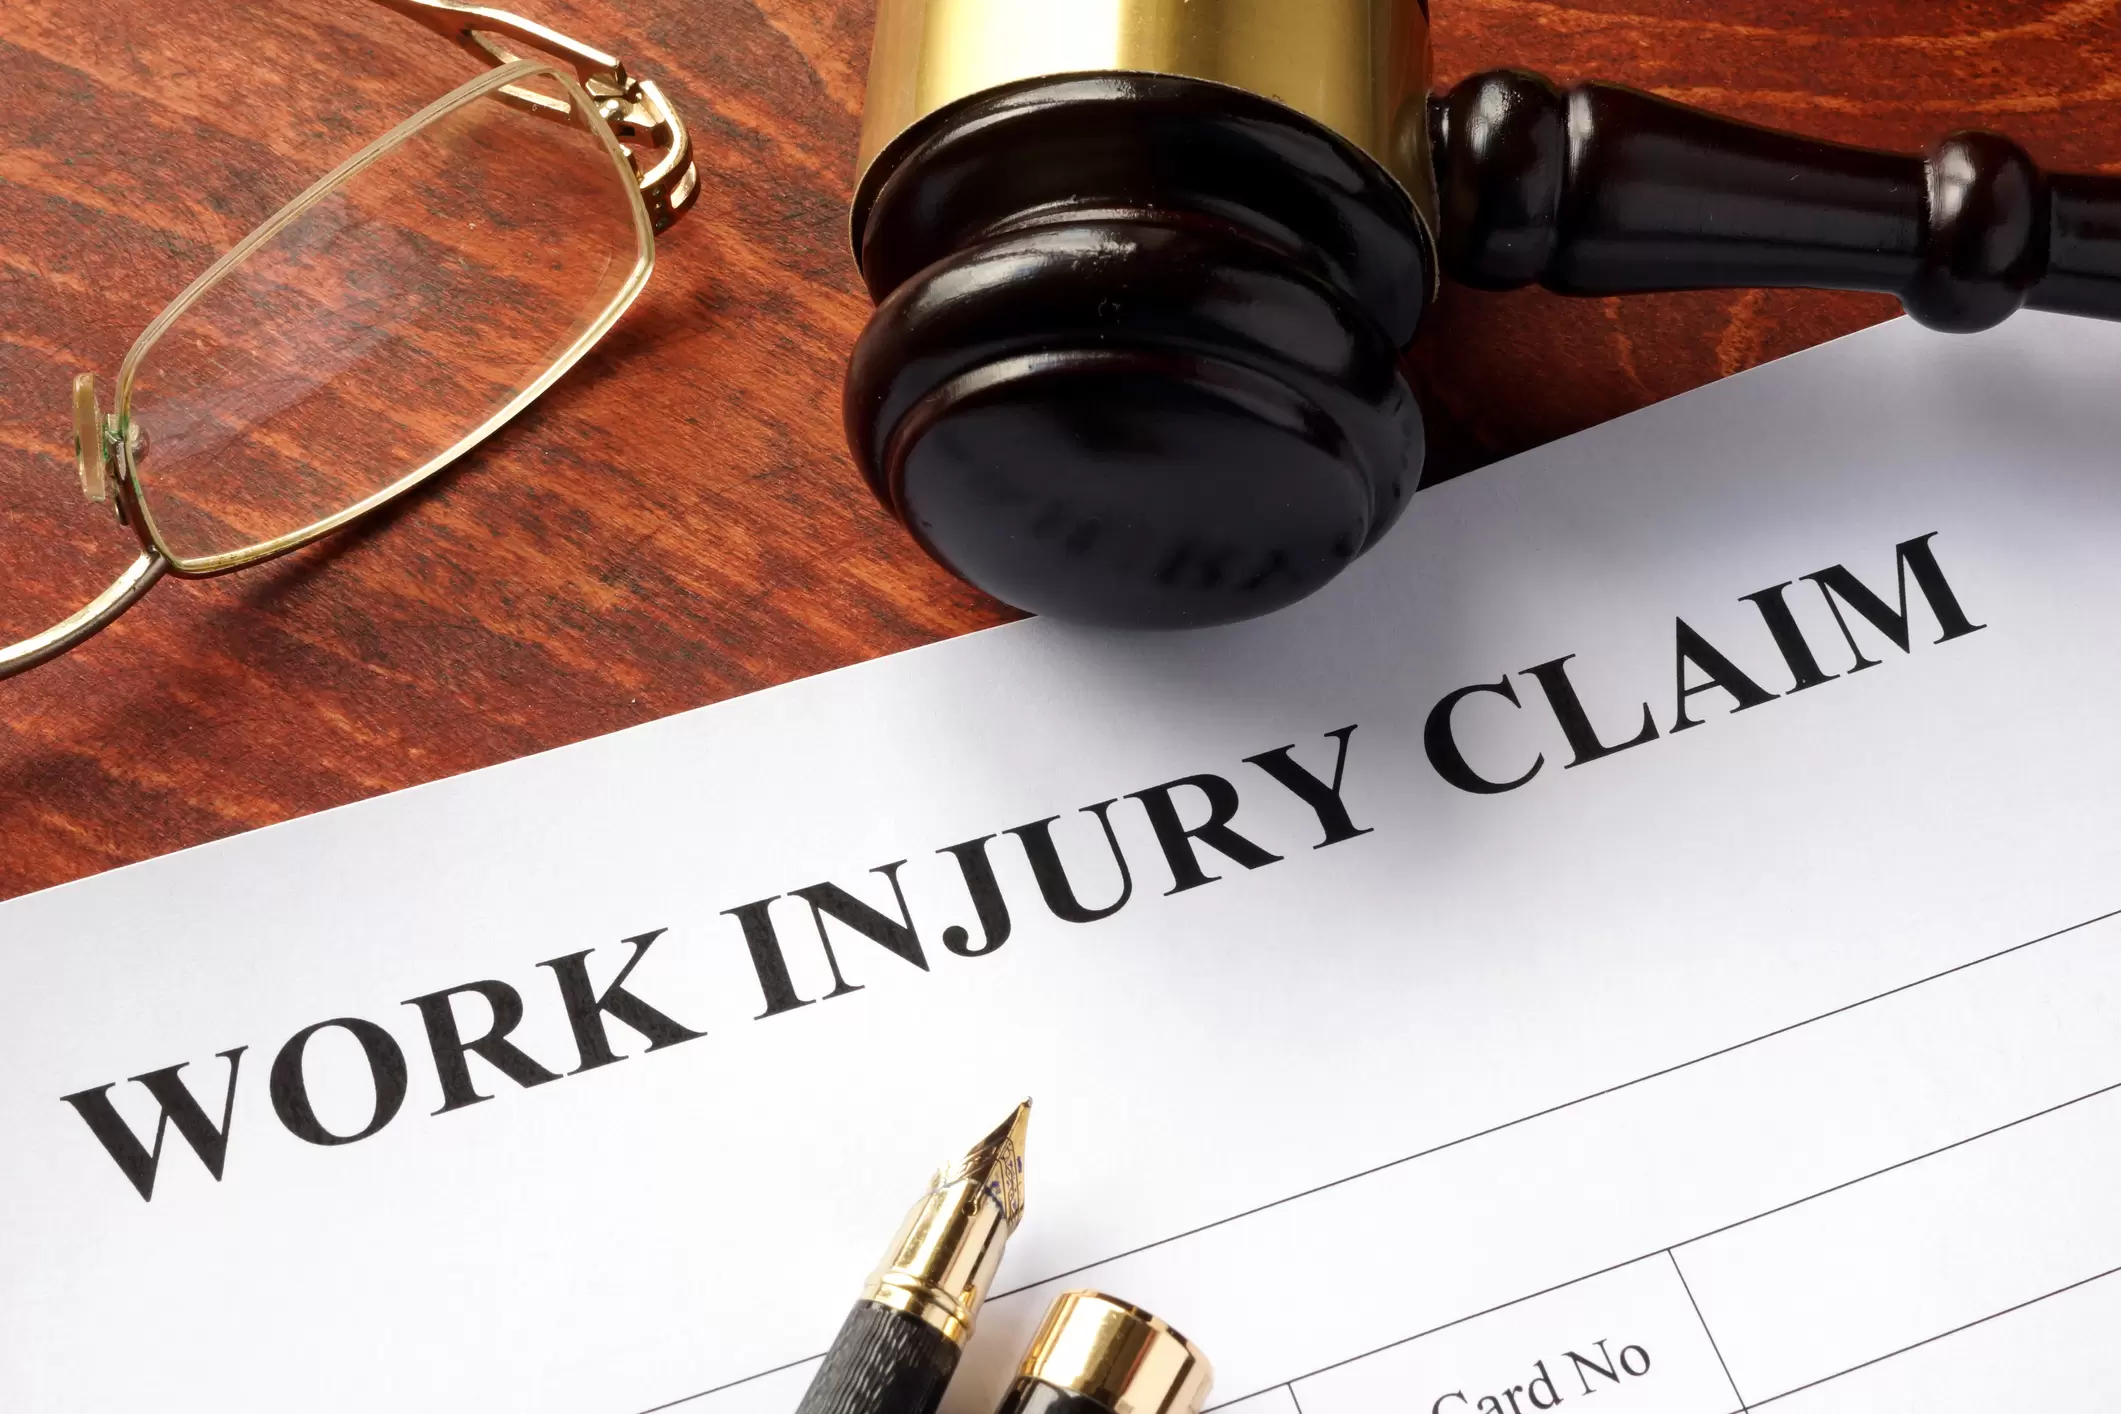 What does a workers' compensation do?